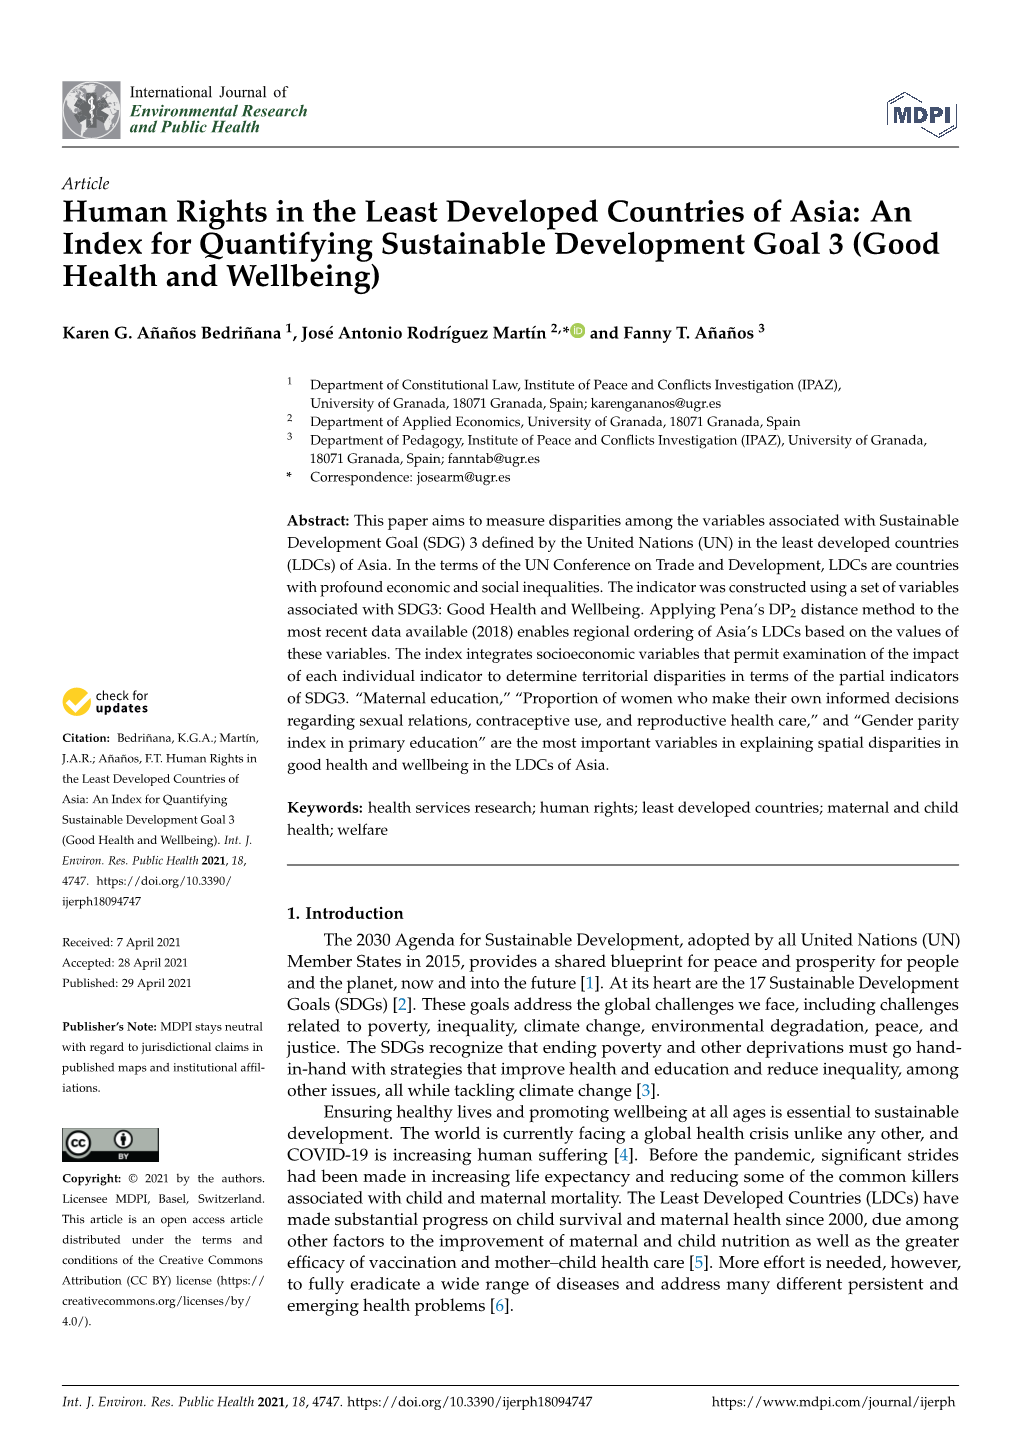 An Index for Quantifying Sustainable Development Goal 3 (Good Health and Wellbeing)